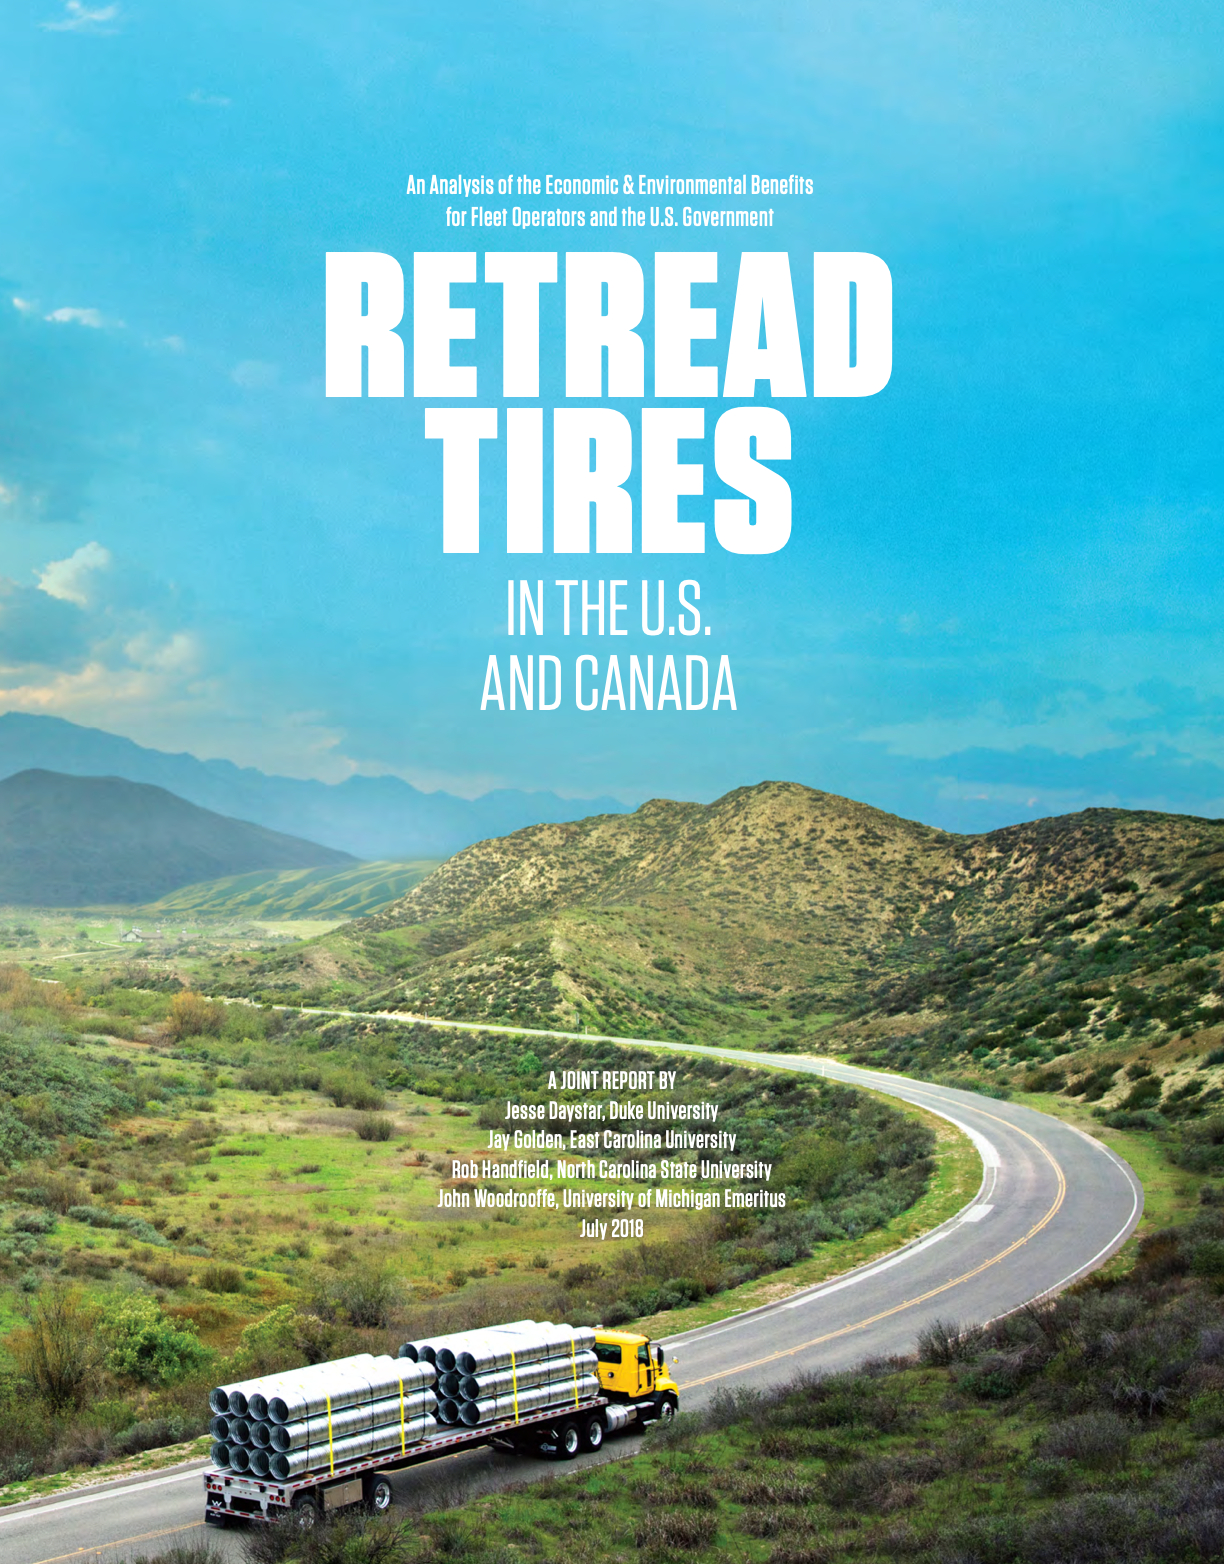 Economic & Environmental Benefits of retread tires in US and Canada 